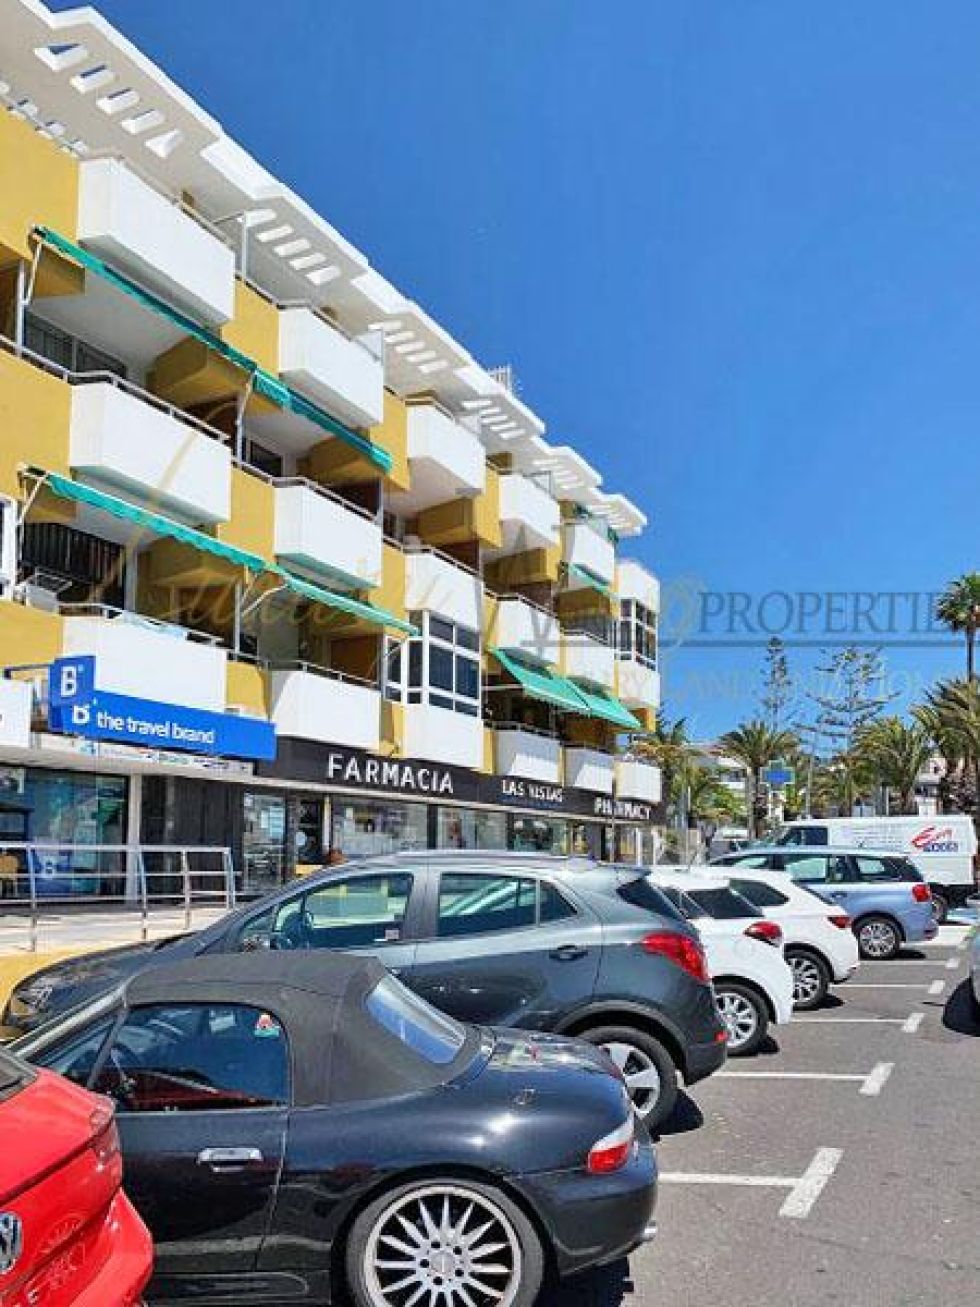 Apartment for sale in  Arona, Spain - LWP4242C Chayofita - Los Cristianos